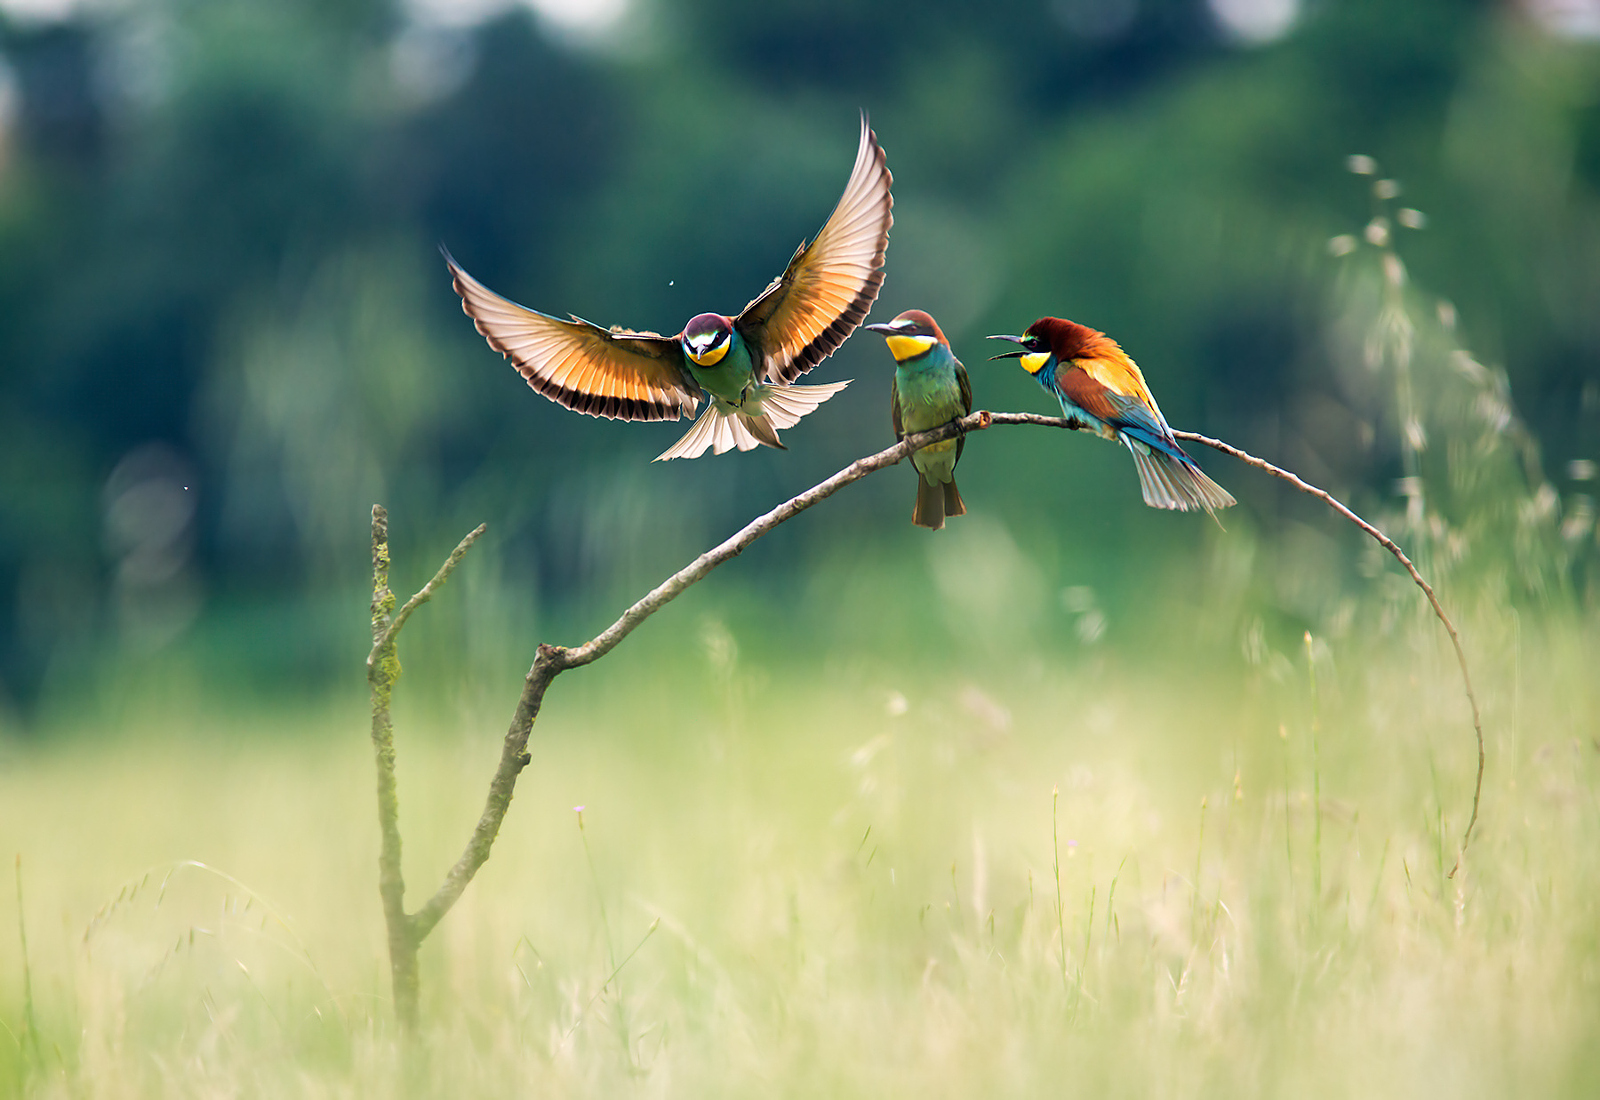 The Story Behind One of the Best Bird Photos on 500px